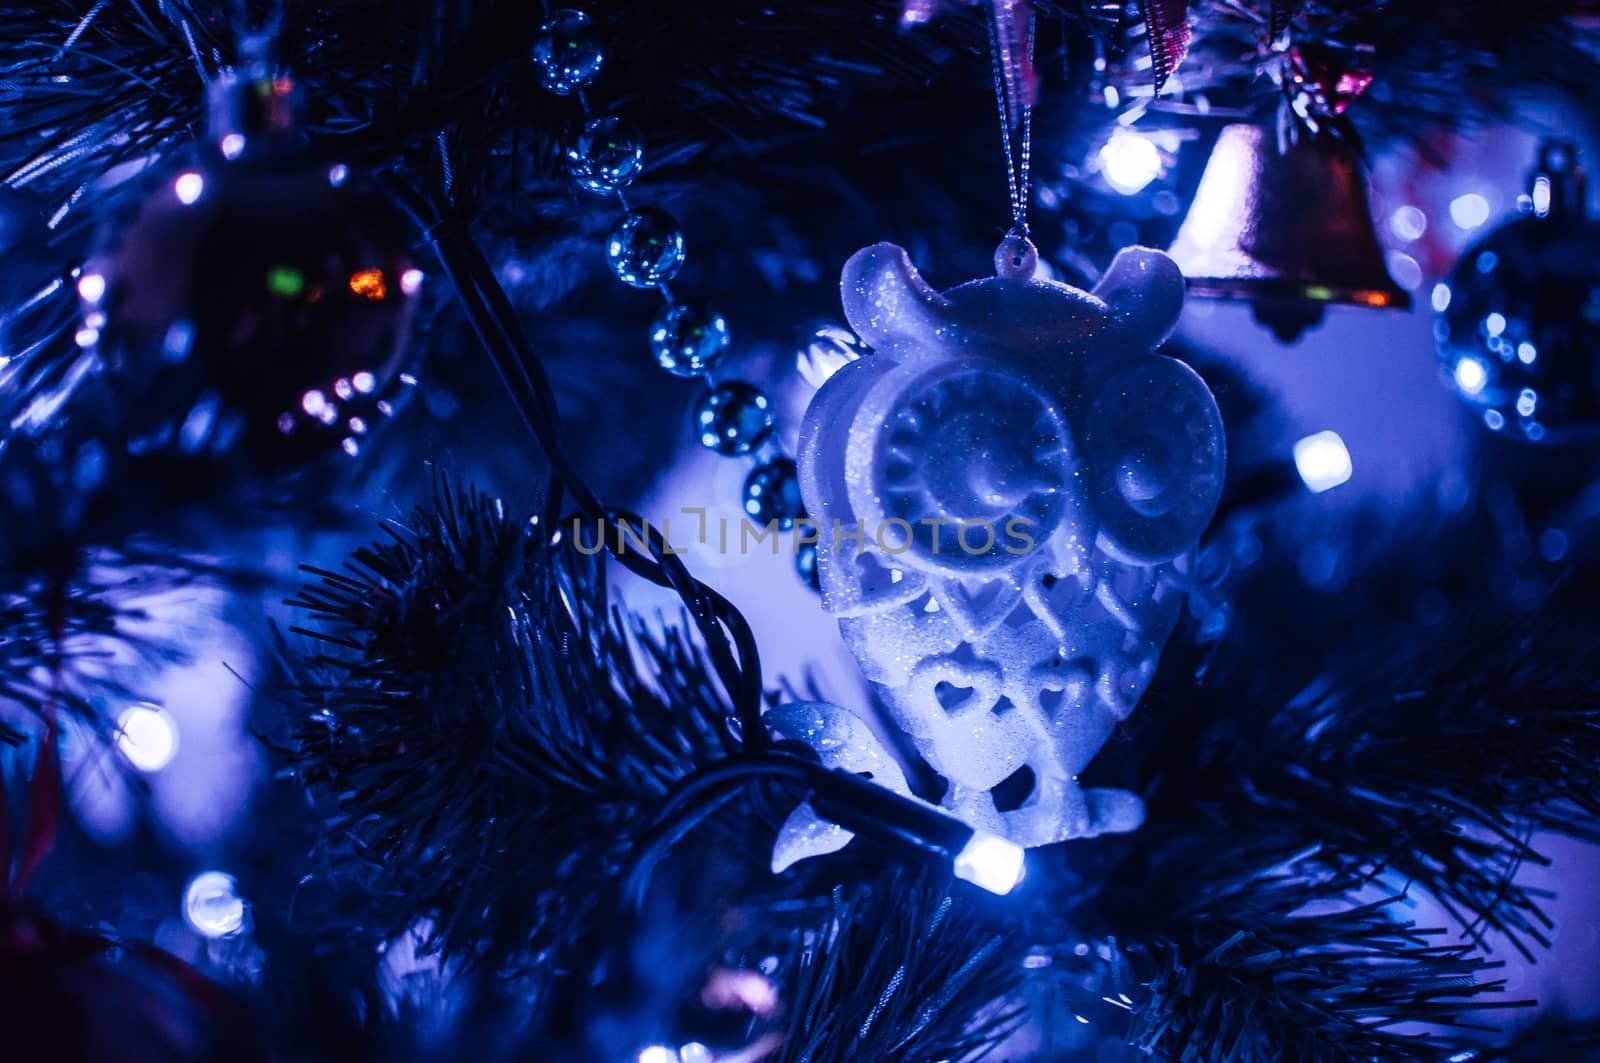 Decorated Christmas tree close-up in neon blue light. Toy glass owl and garland with lights with lanterns. New Year's baubles macro photo with bokeh. Winter holiday light decoration by Alla_Morozova93